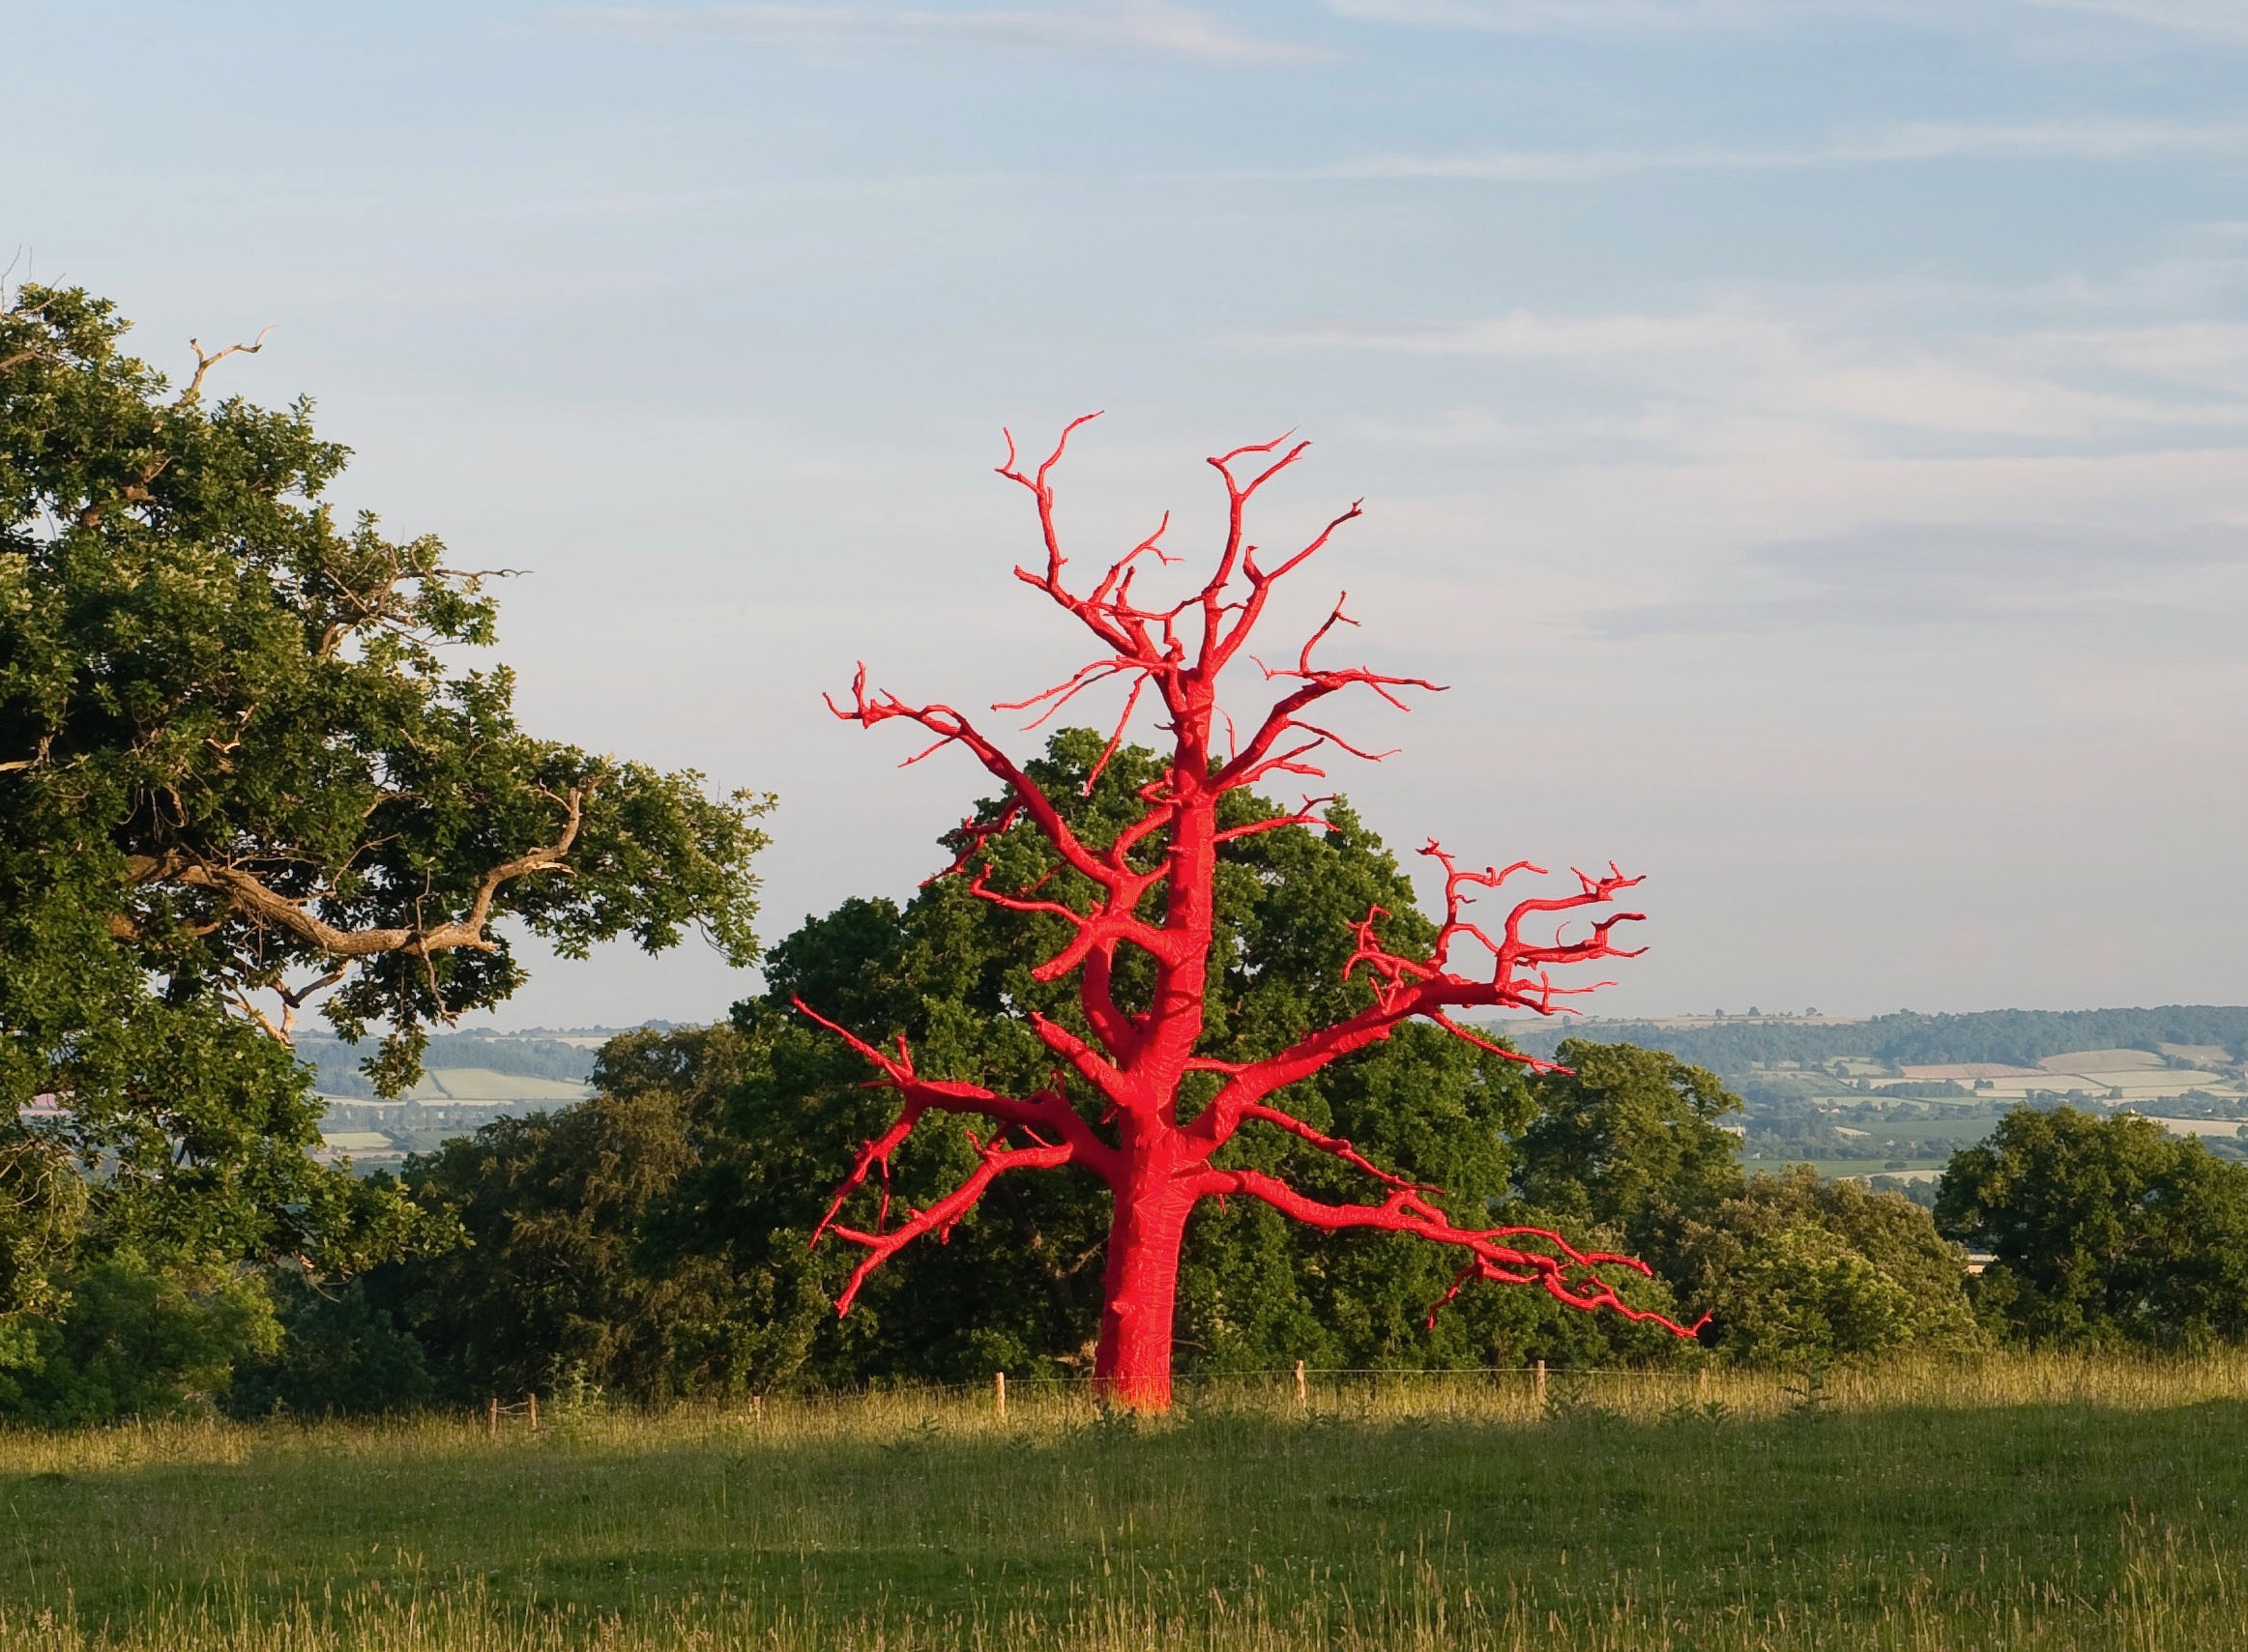 Artwork (Red Tree) at Croft Castle, Herefordshire, by Philippa Lawrence